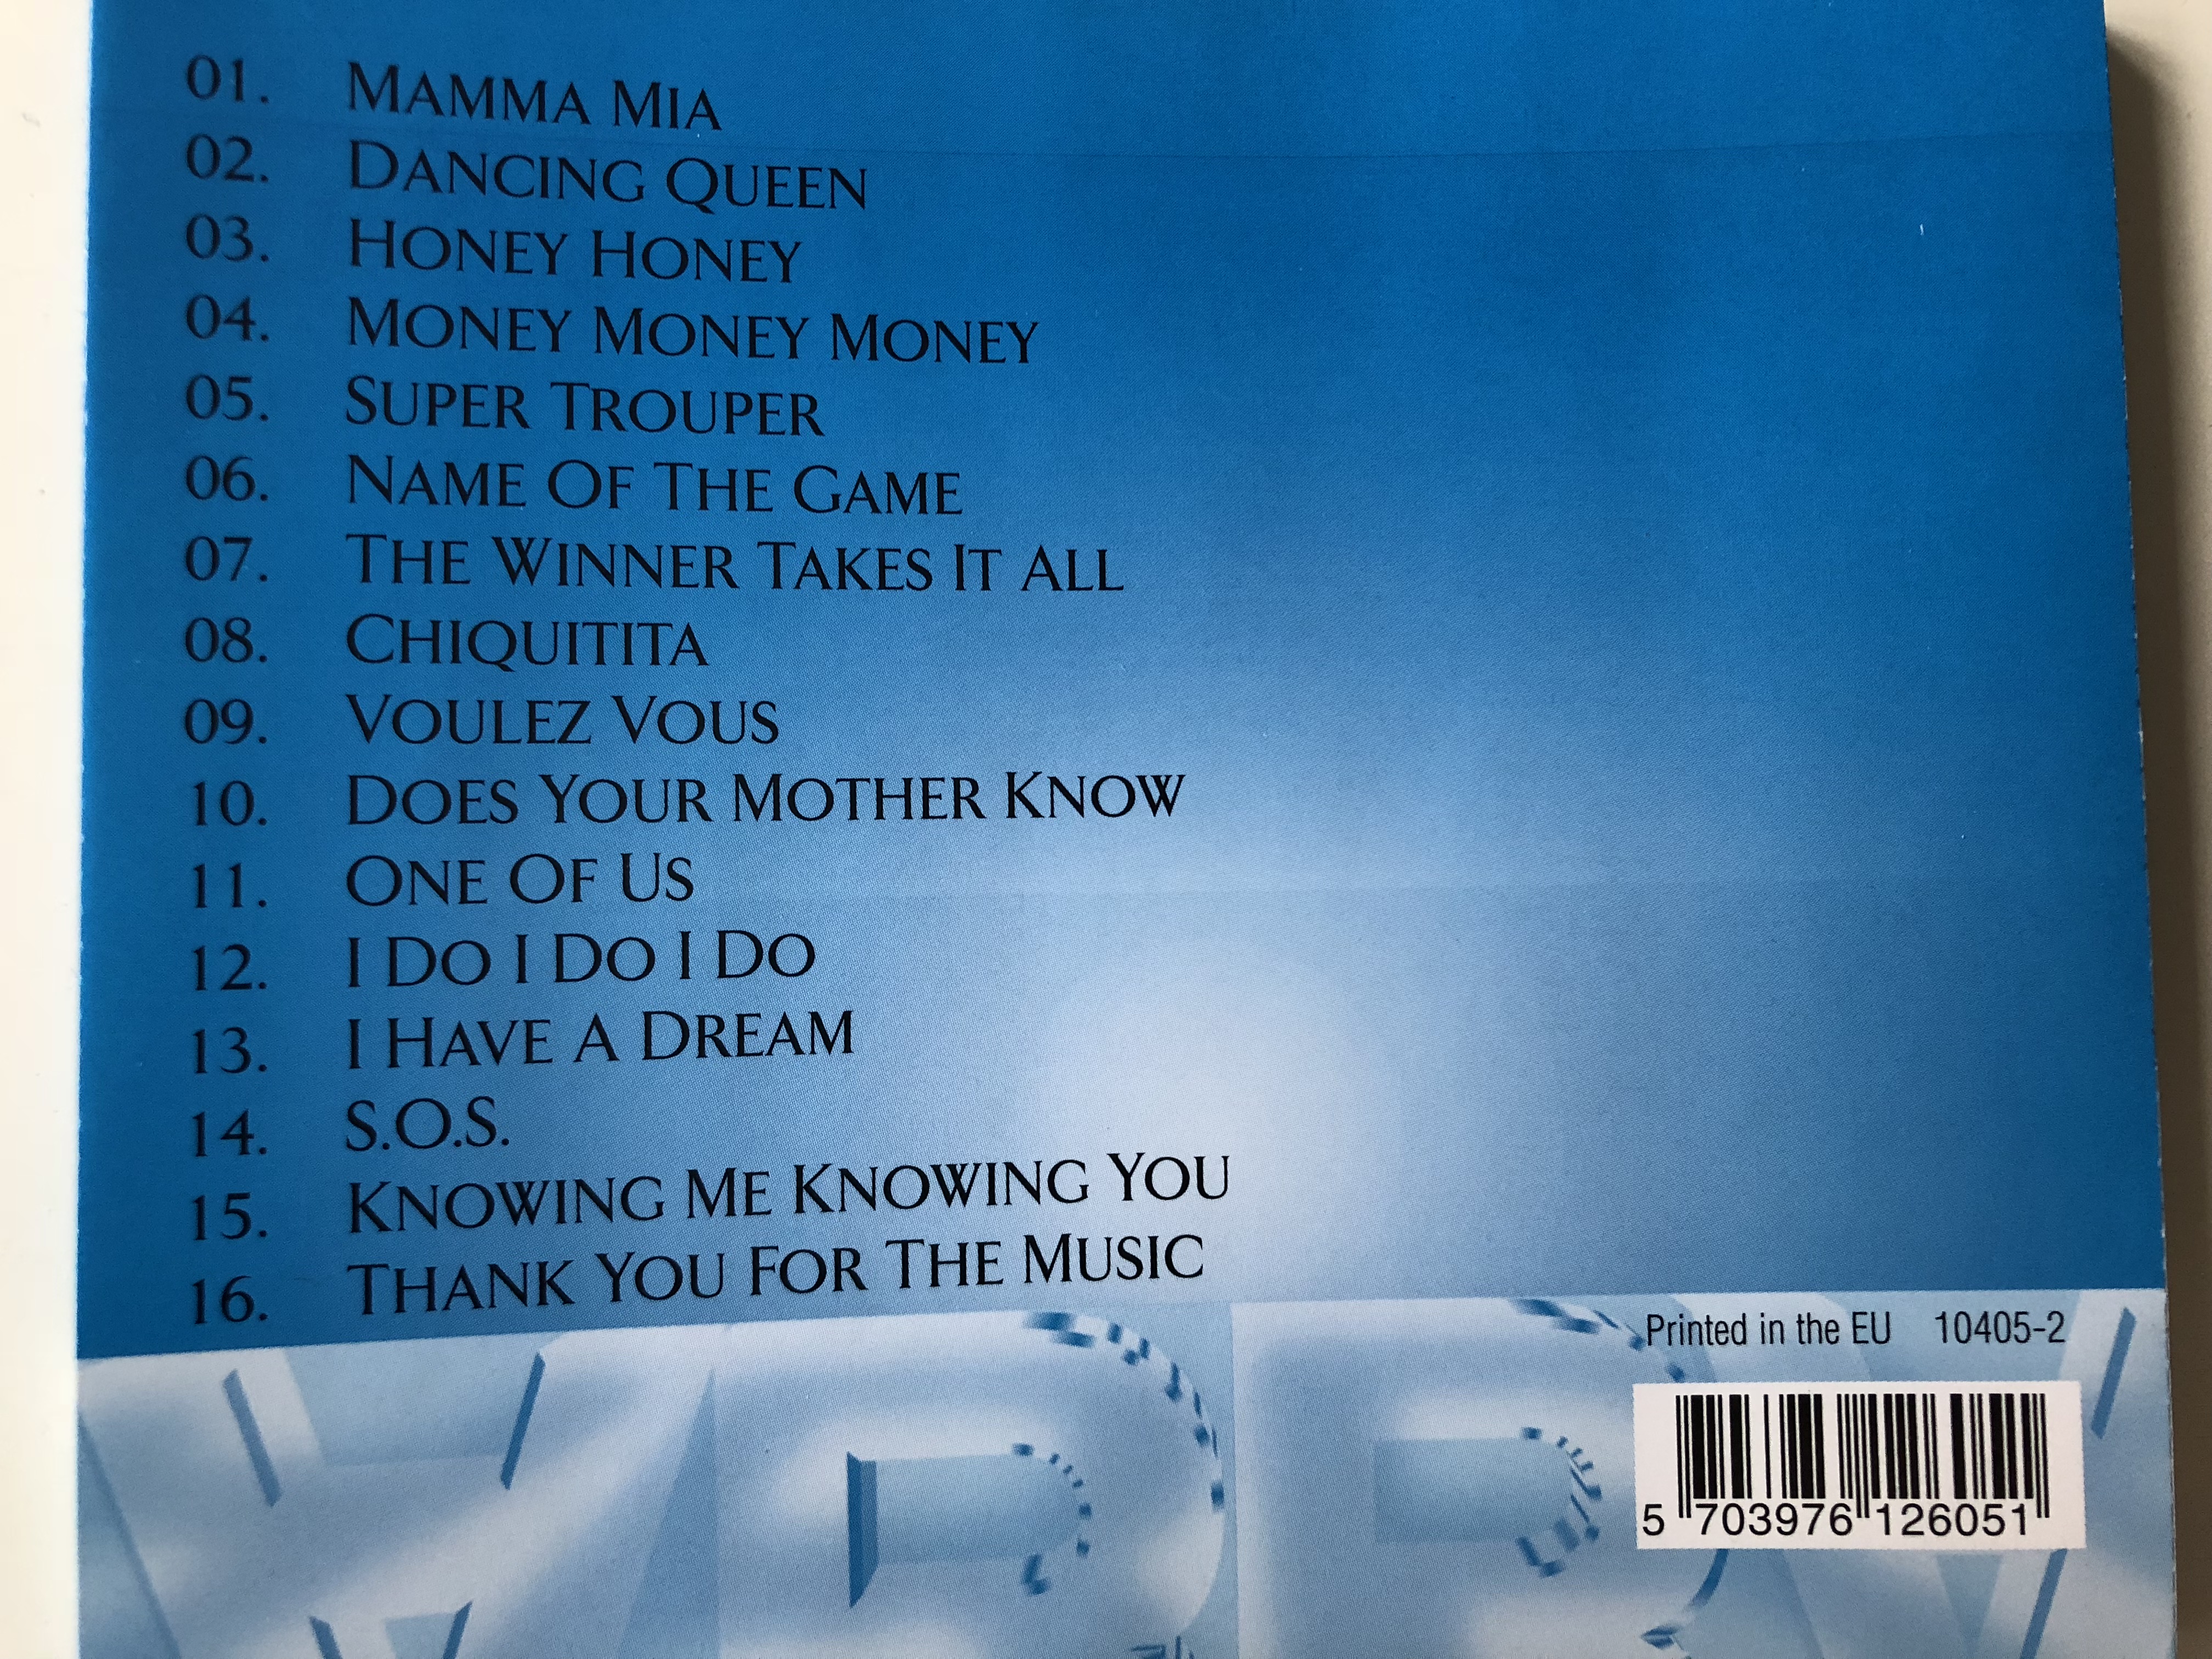 mamma-mia-highlights-from-the-new-musical-based-on-the-songs-of-abba-performed-by-the-london-theatre-players-singers-audio-cd-1999-a-play-3-.jpg